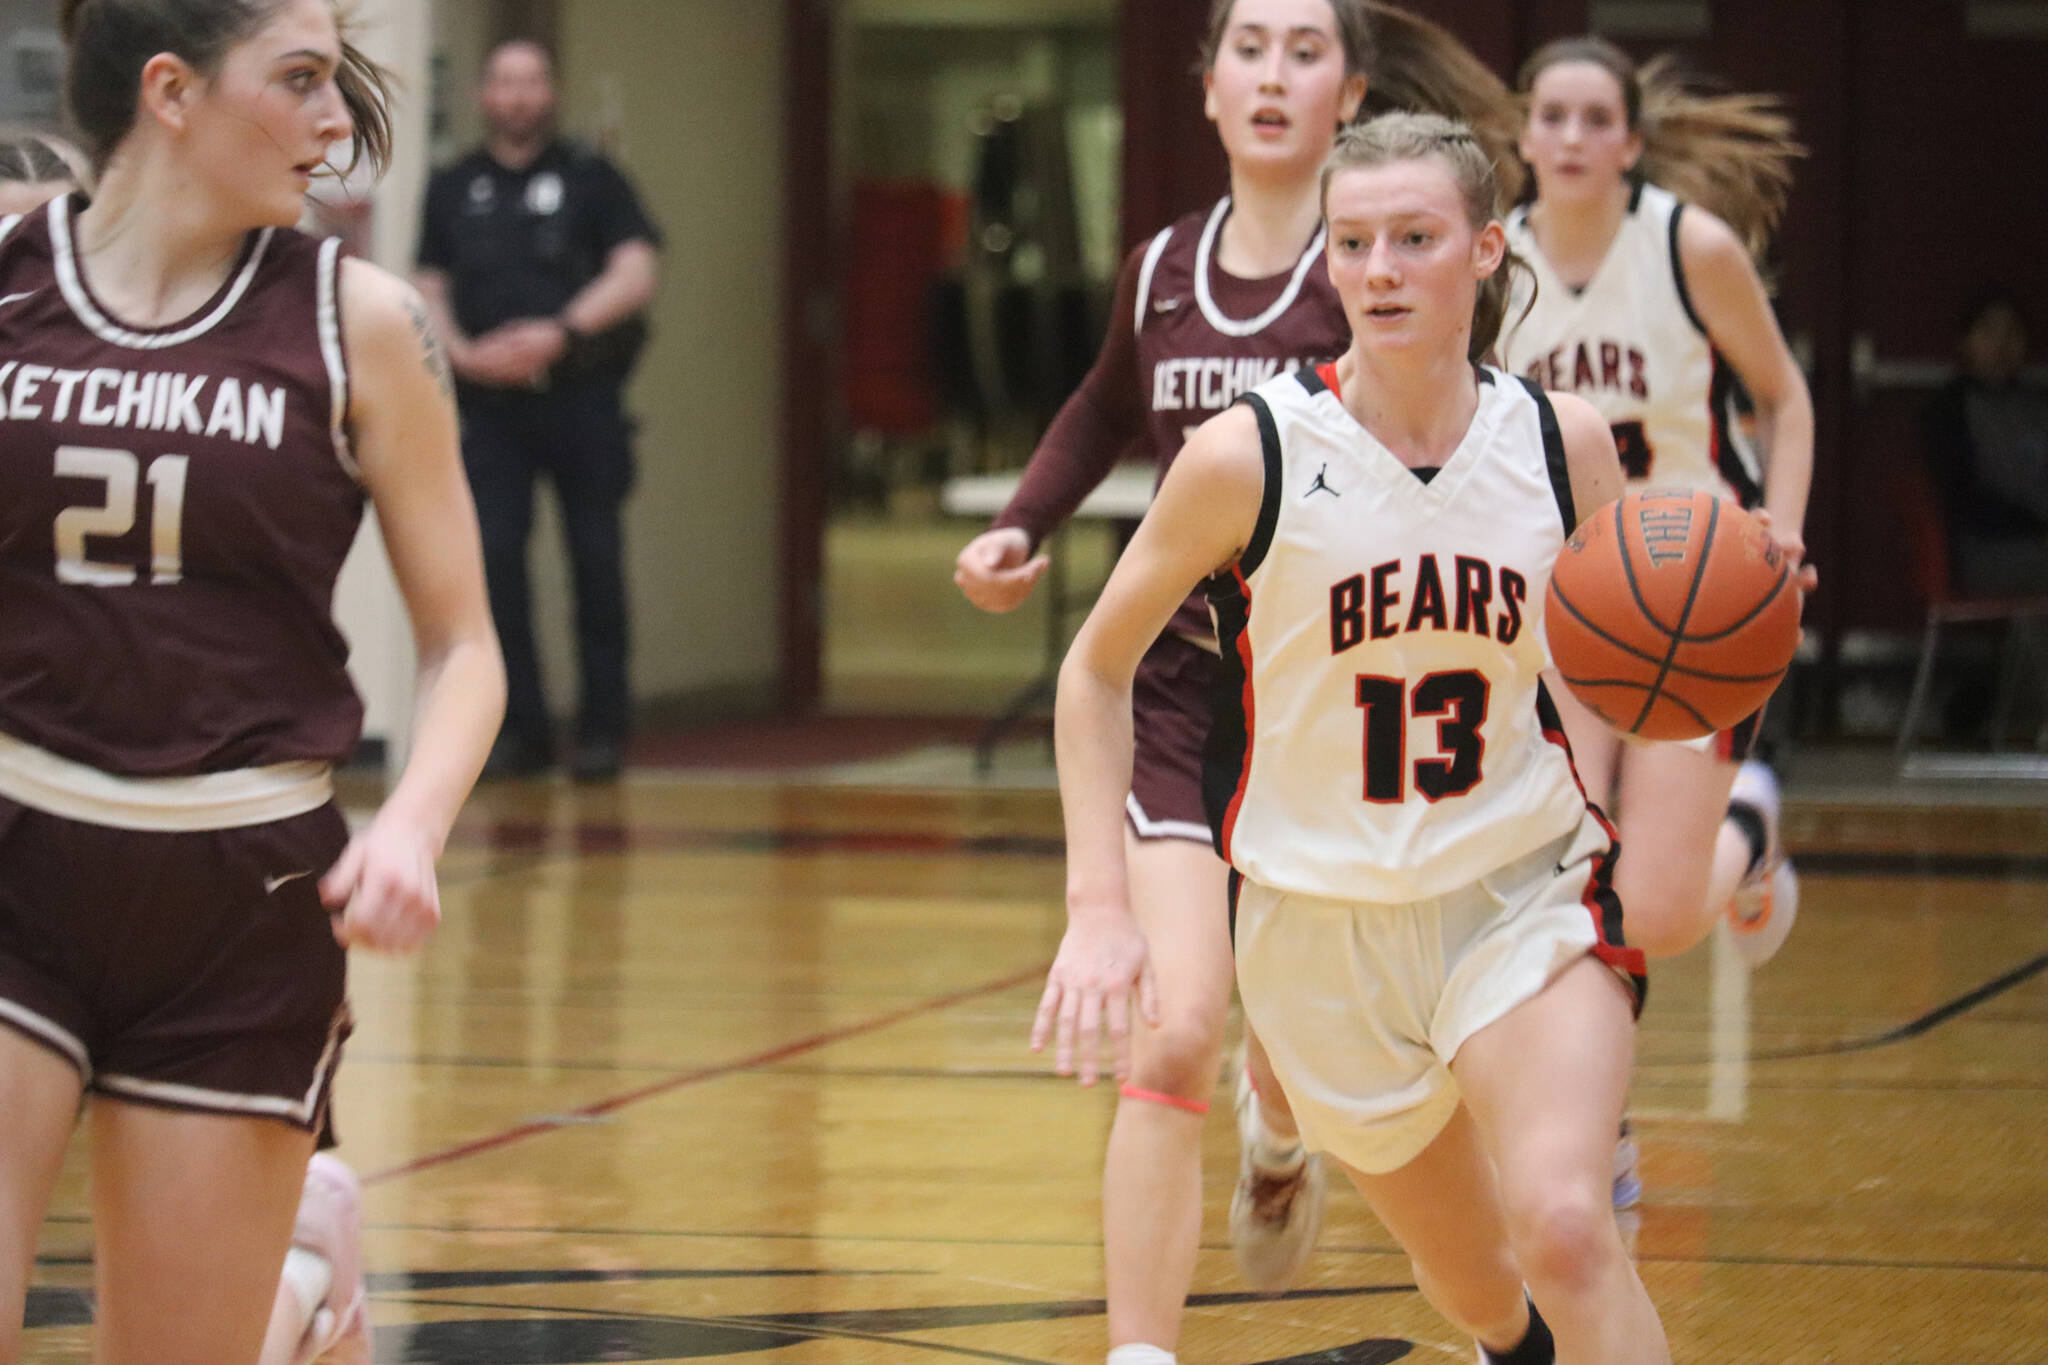 Skylar Tuckwood sprints down the court against Ketchikan High School on Friday, Feb. 24 at JDHS. Though it’s a game the Crimson Bears would ultimately lose, Tuckwood led her team for a total of 19 points. (Jonson Kuhn / Juneau Empire File)